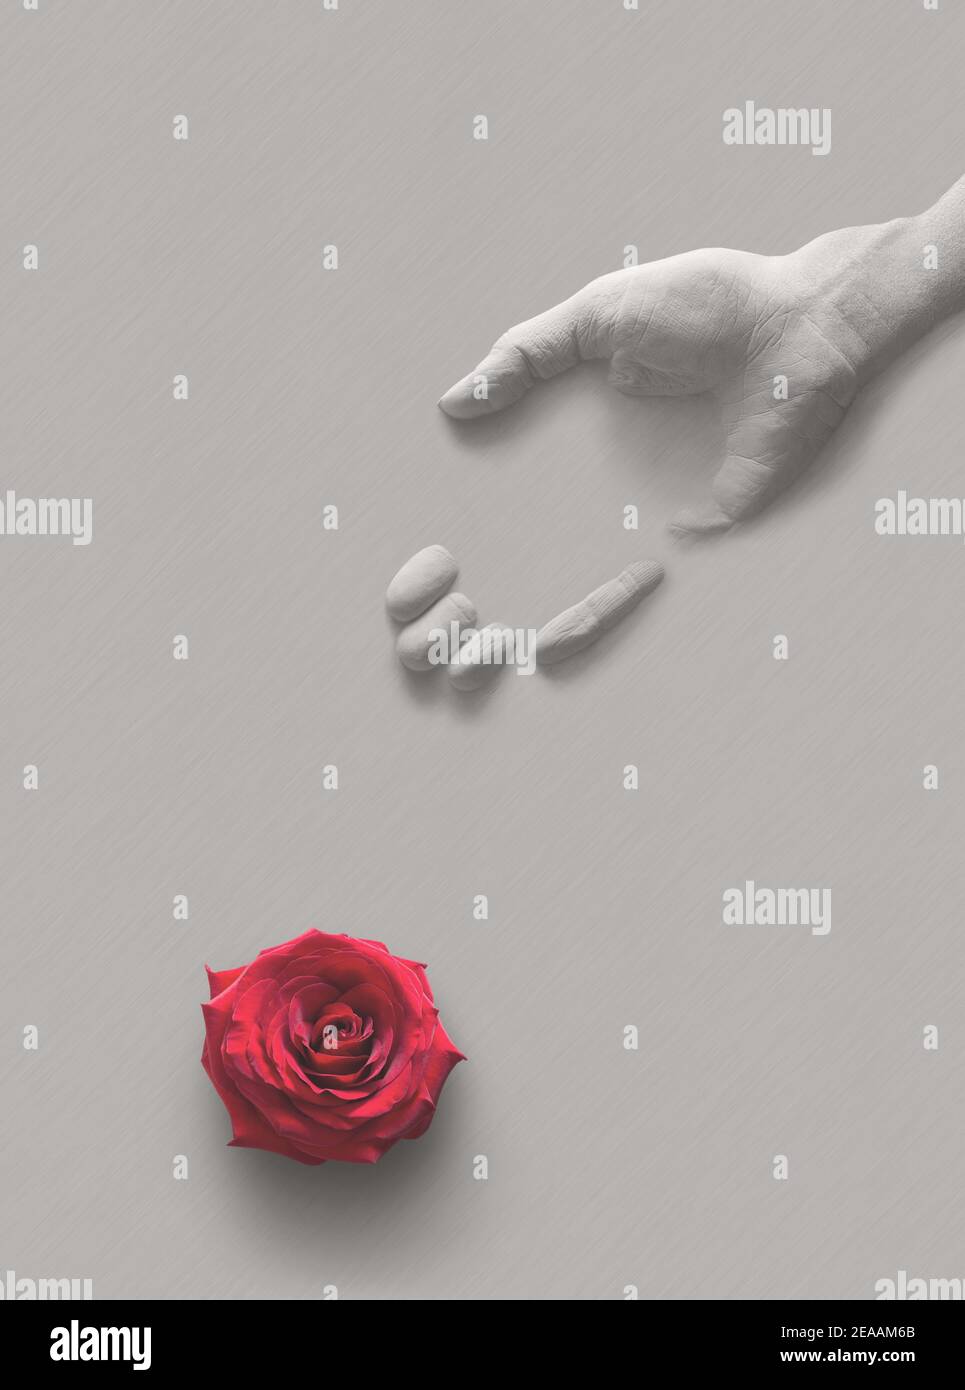 Human gypsum palm and a red rose flower blooming on a gray background. Concept to show that the time of youth is short and death will speedily come. E Stock Photo